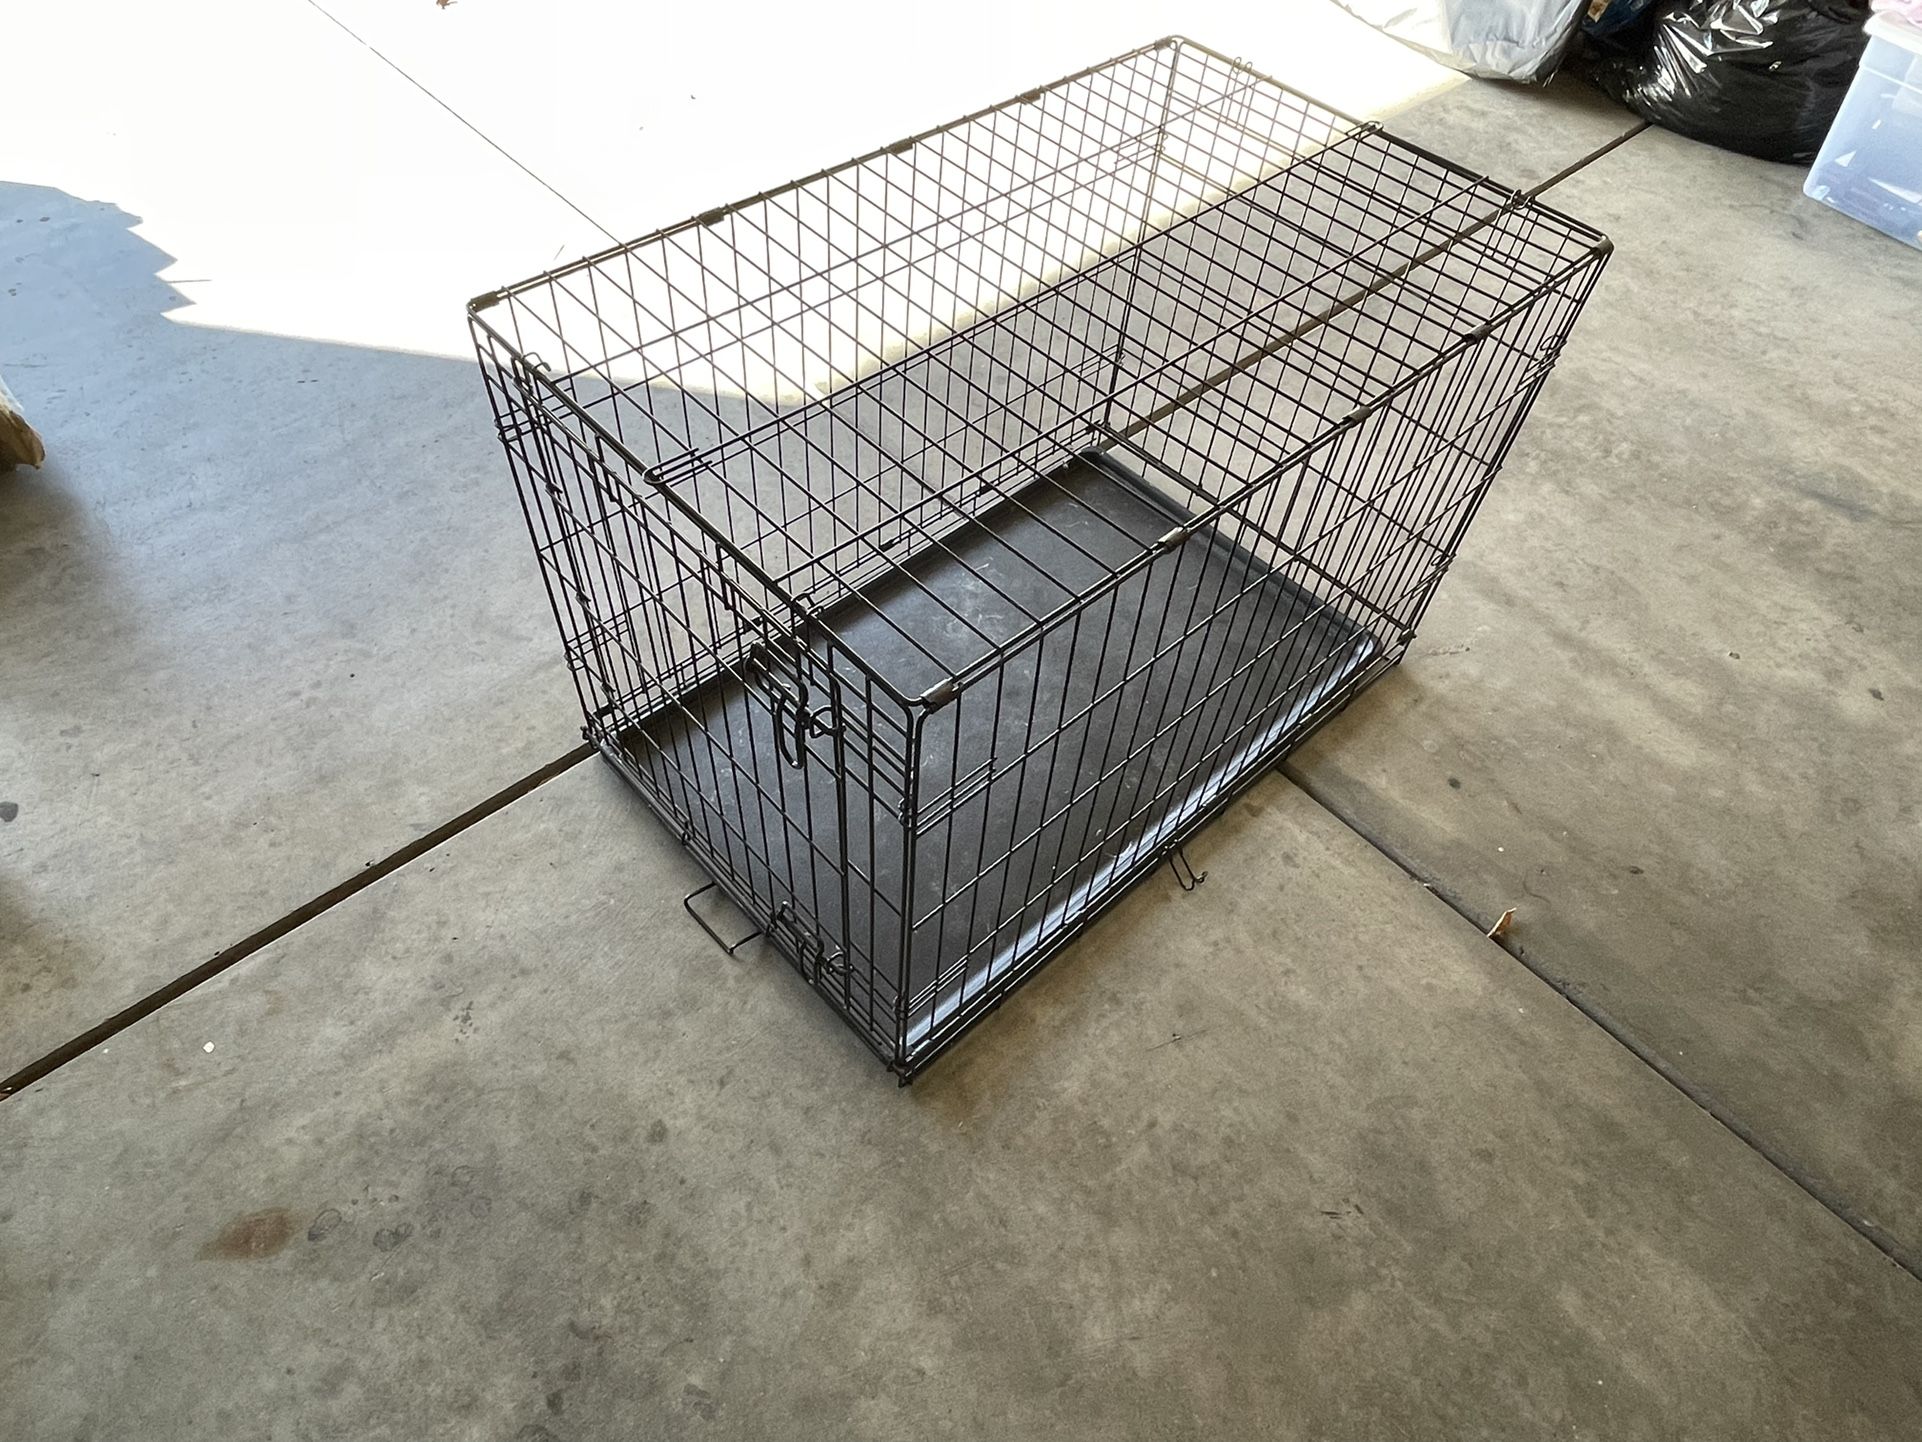 Collapsible Metal Dog Crate 